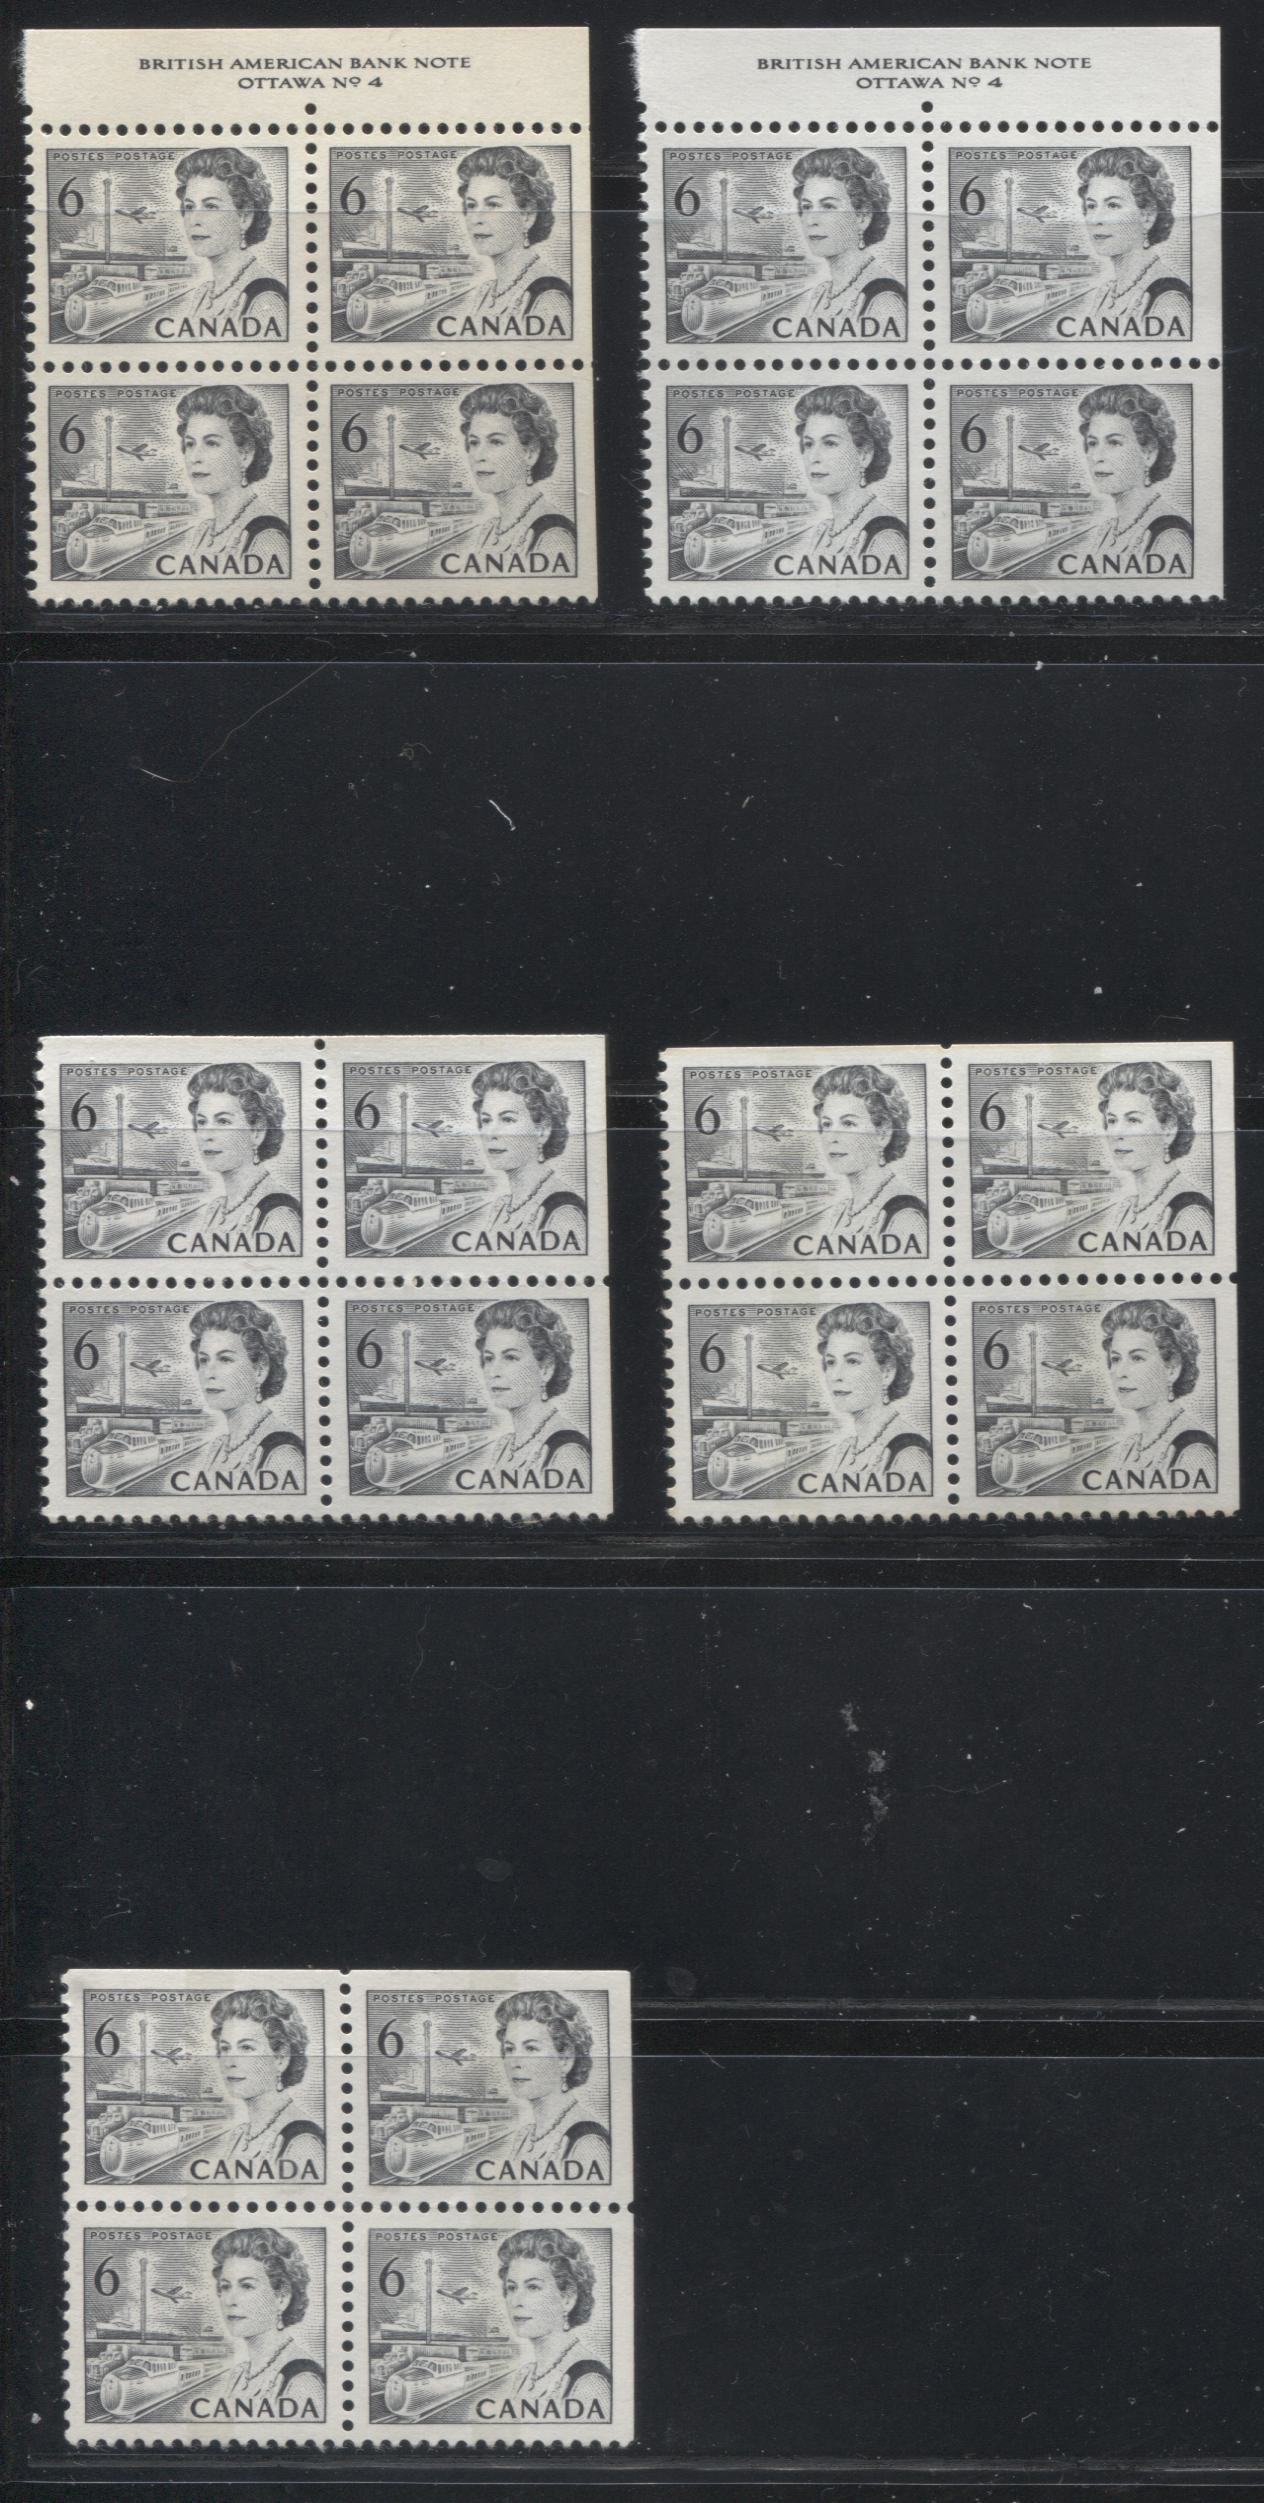 Lot 79 Canada #460c-cp 6c Black Queen Elizabeth II, 1967-1973 Centennial Issue, Five VFNH Tagged & Untagged UR Plate 4 Or Blank Blocks of 4 On Various DF Vertical Ribbed Papers With Dex Gum, Die 2